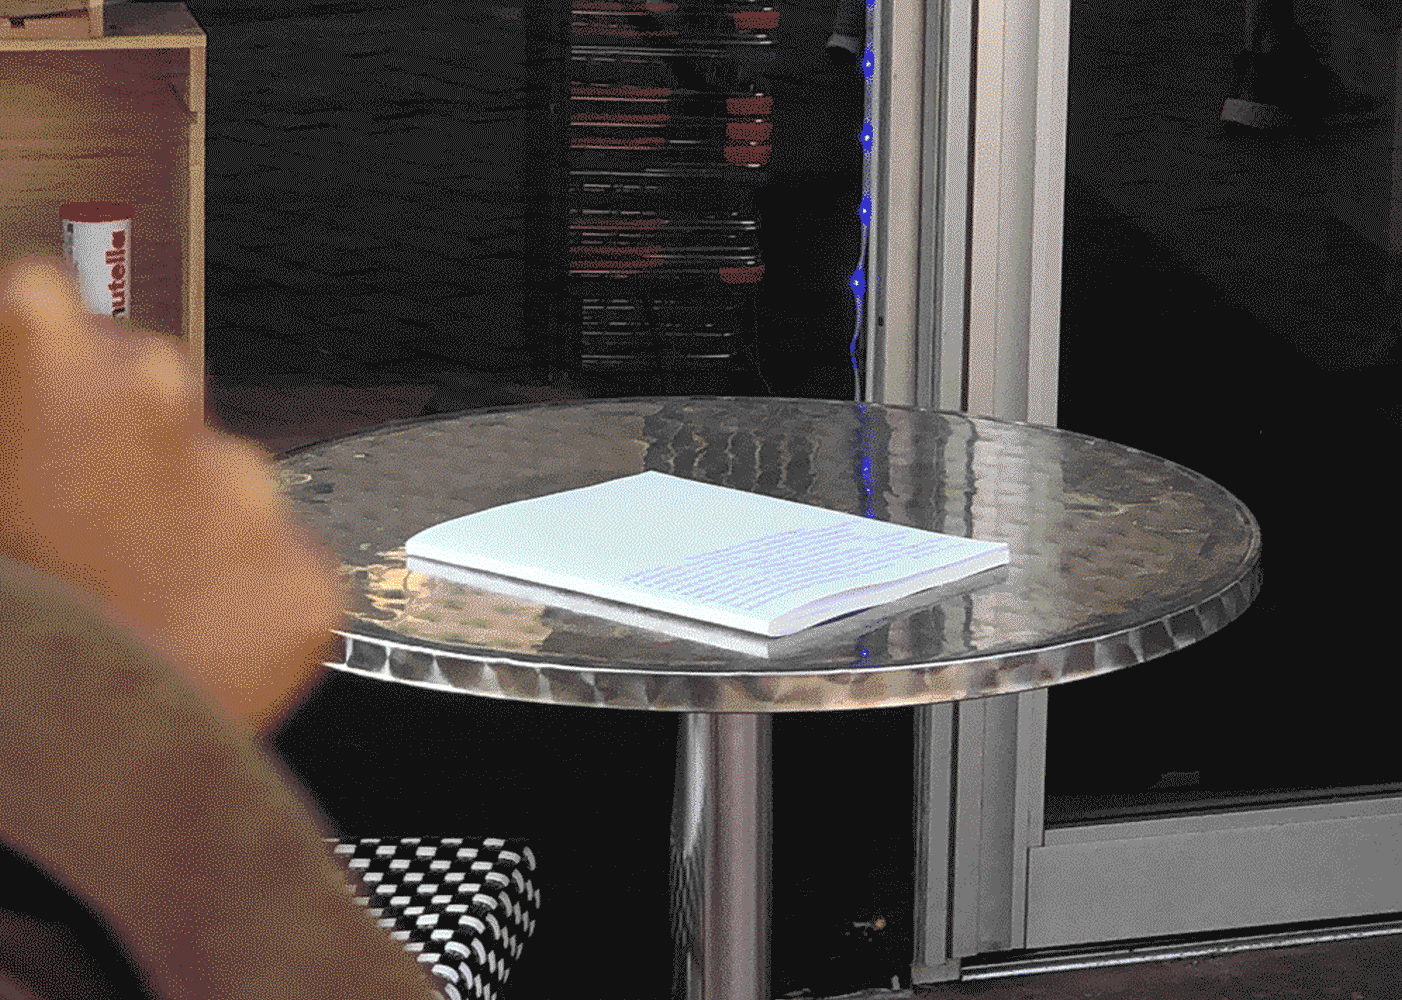 a book with a white cover on a reflective metallic tabletop in front of some shop windows. in the foreground is the hand of a stranger passing by.